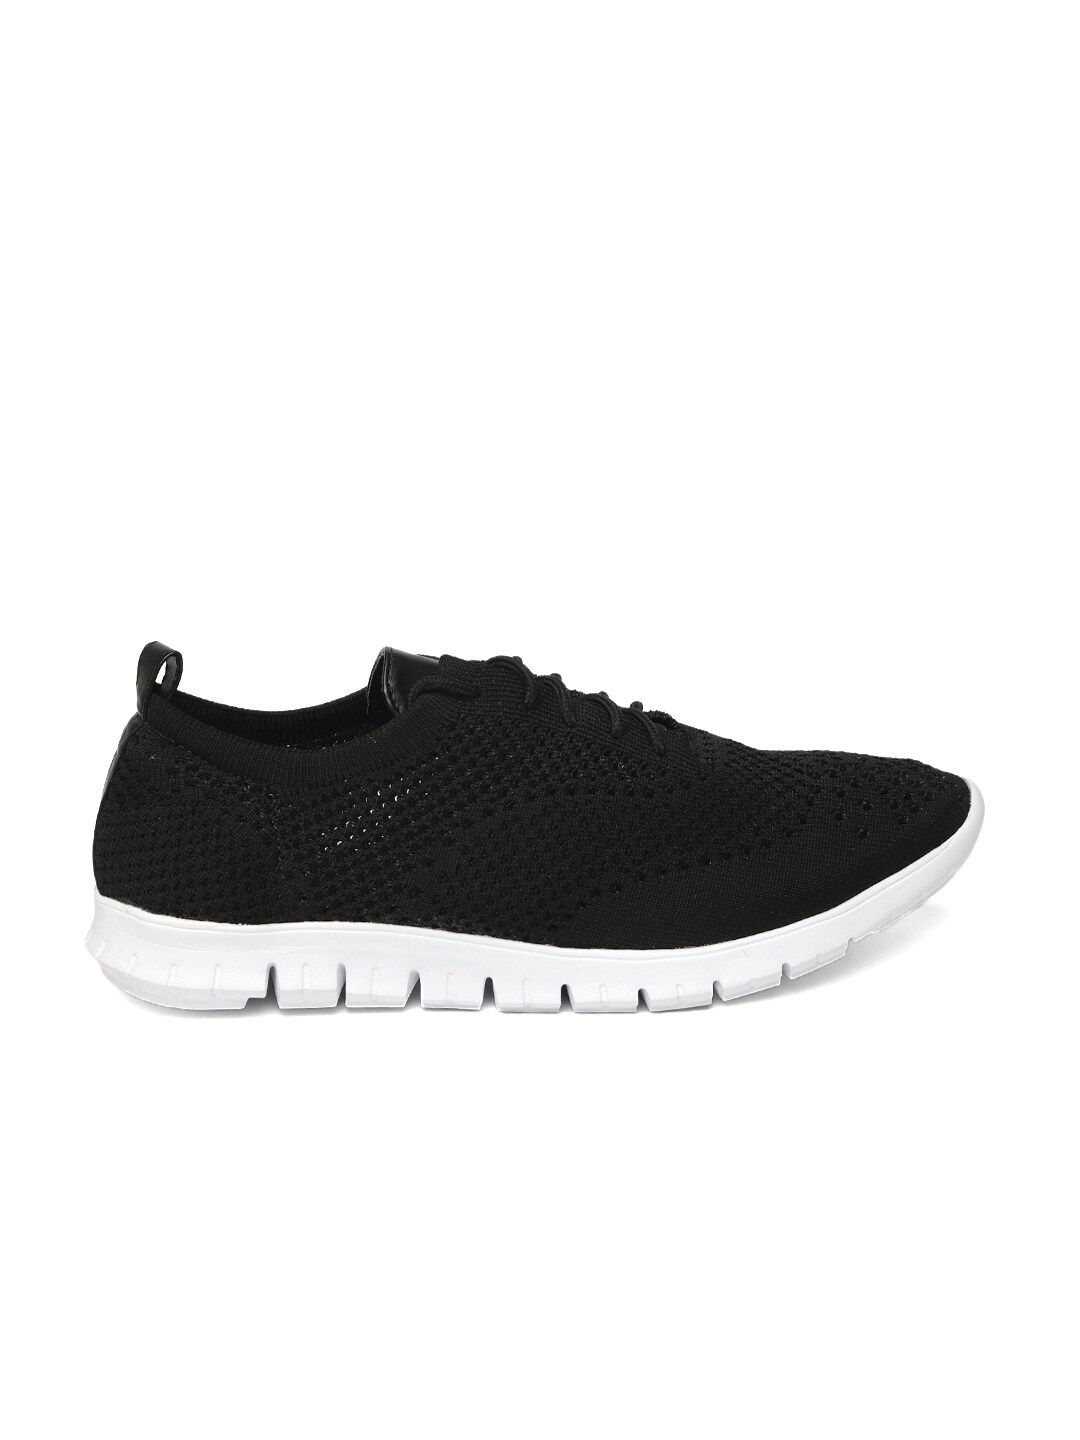 ether Women Black Woven Design Sneakers Price in India